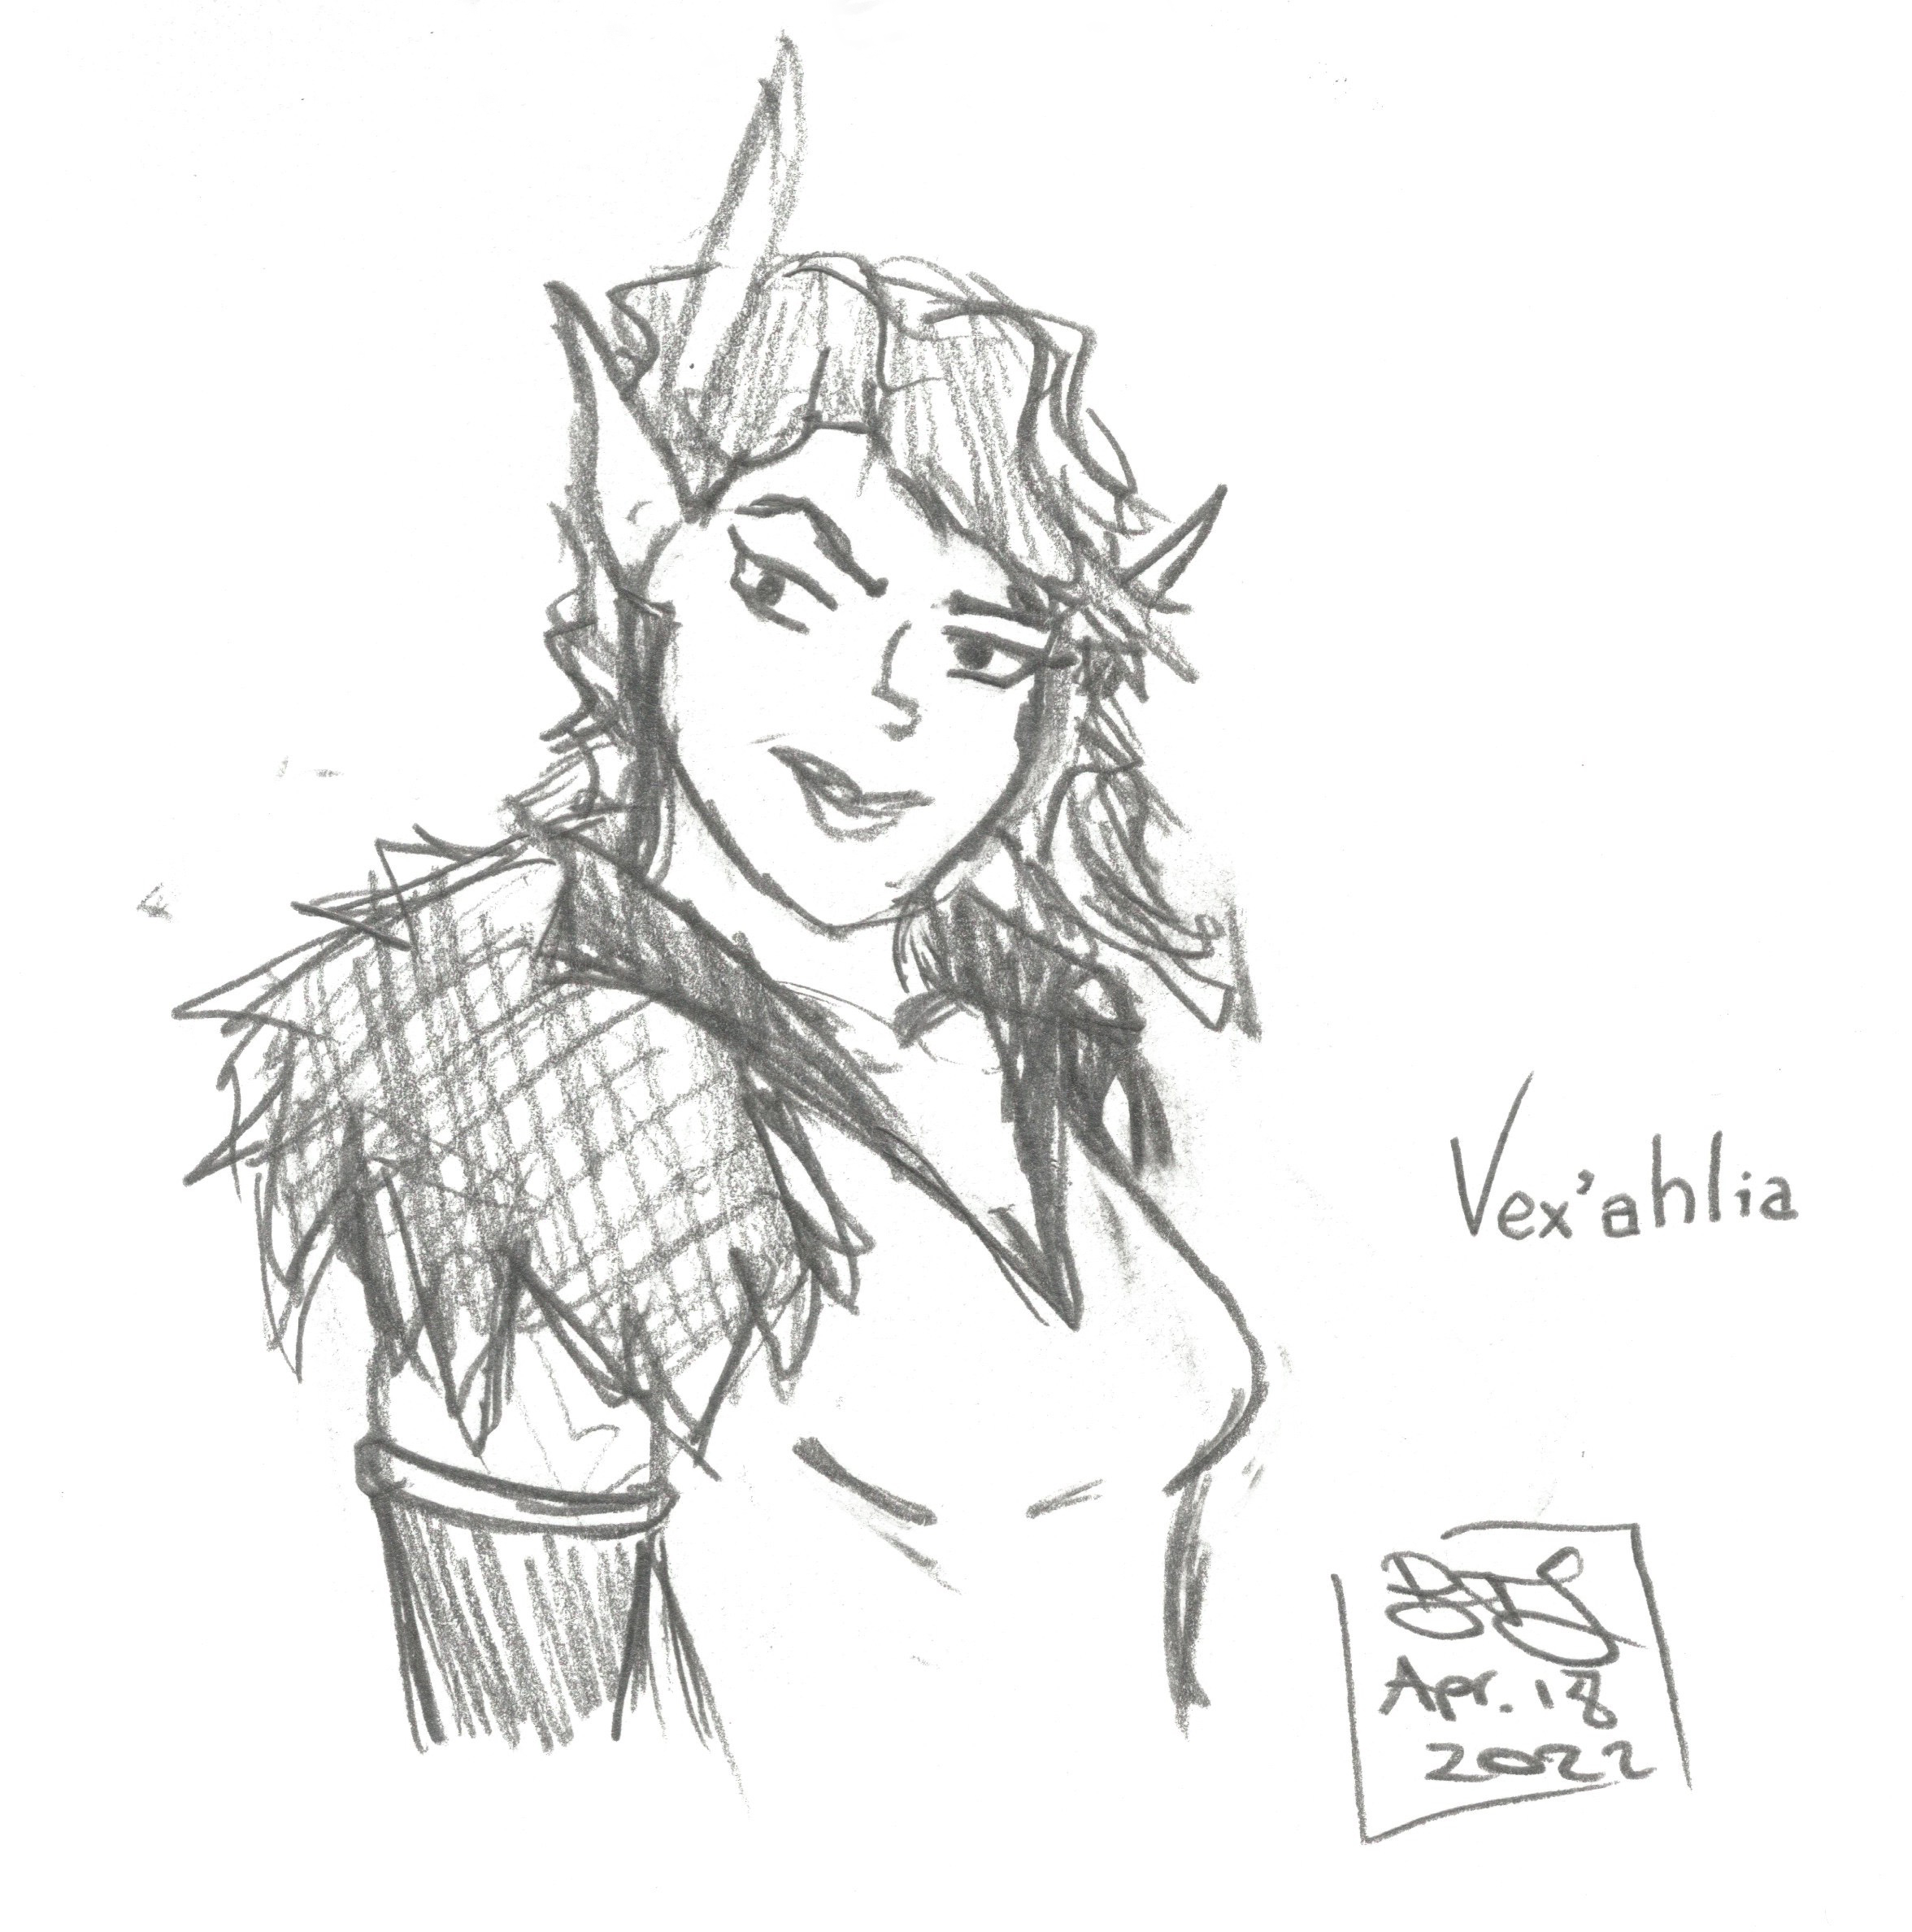 Vex'ahlia (Inspired by Critical Role: The Legend of Vox Machina); Pencil on Paper, April 2022